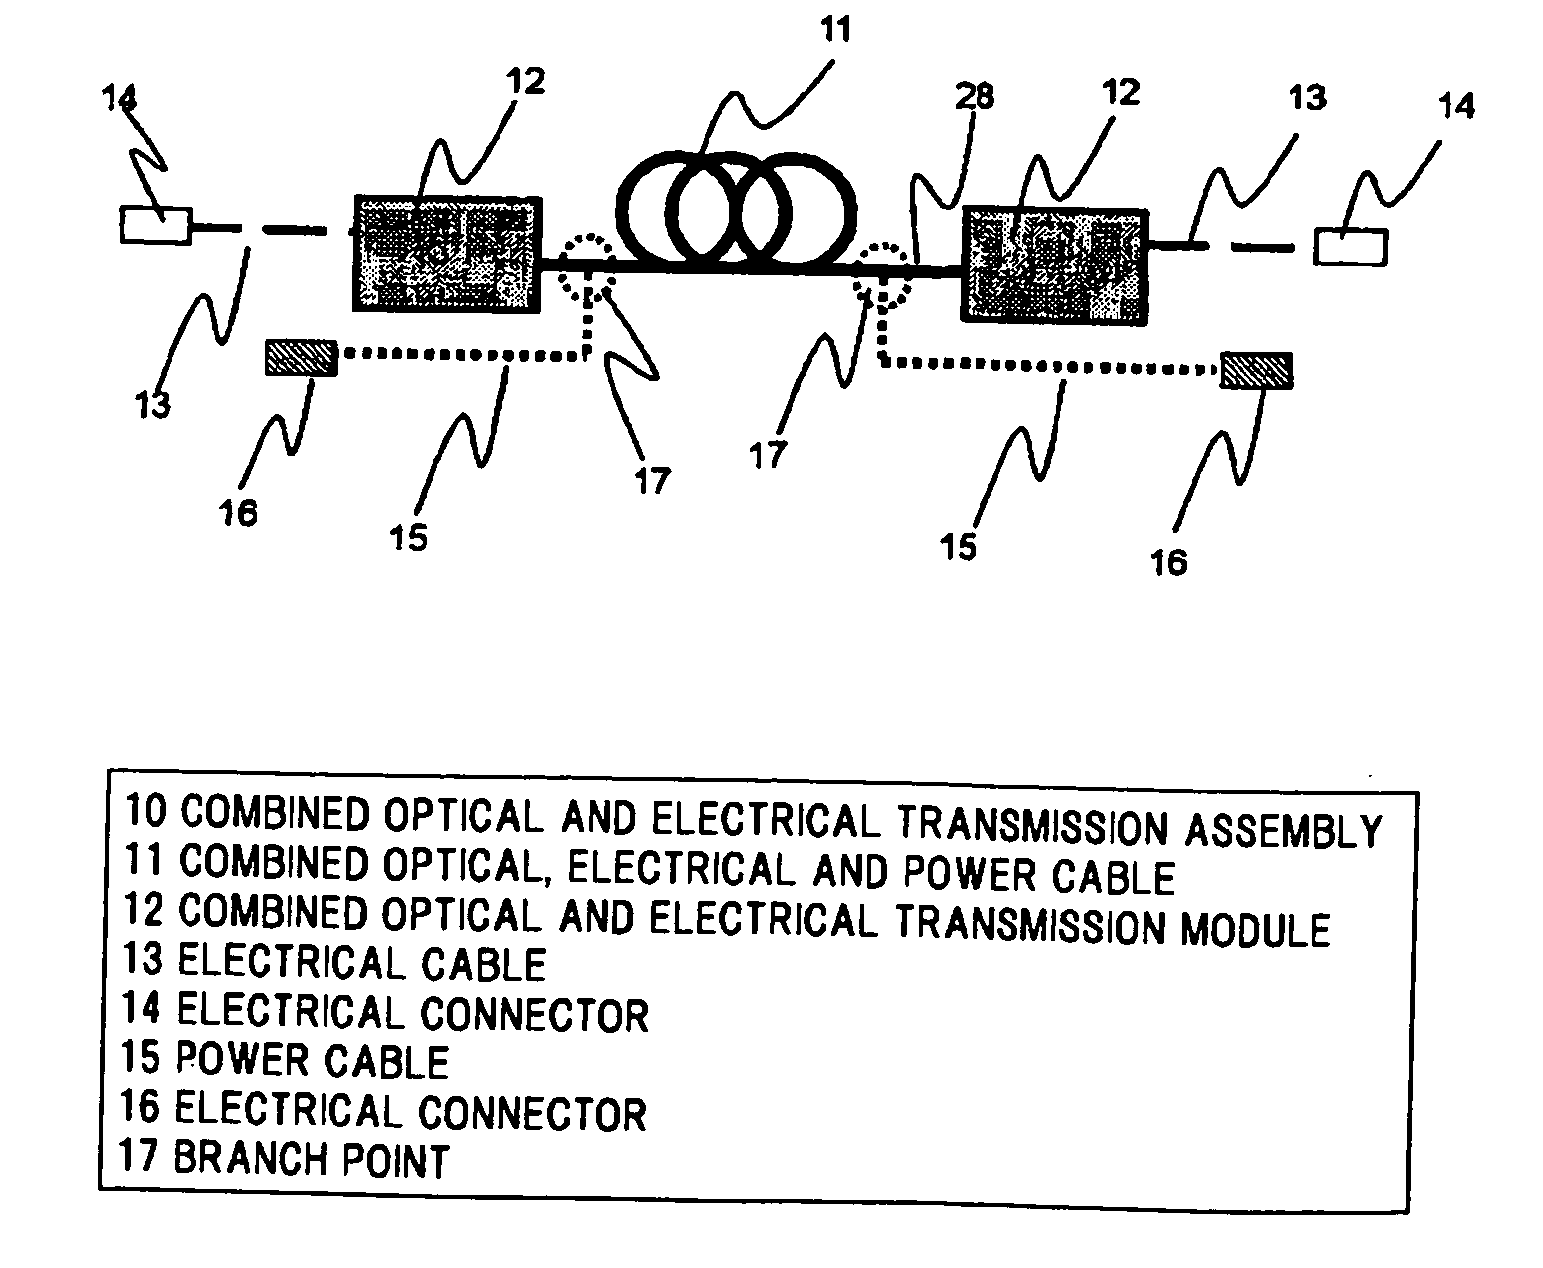 Combined optical and electrical transmission assembly and module